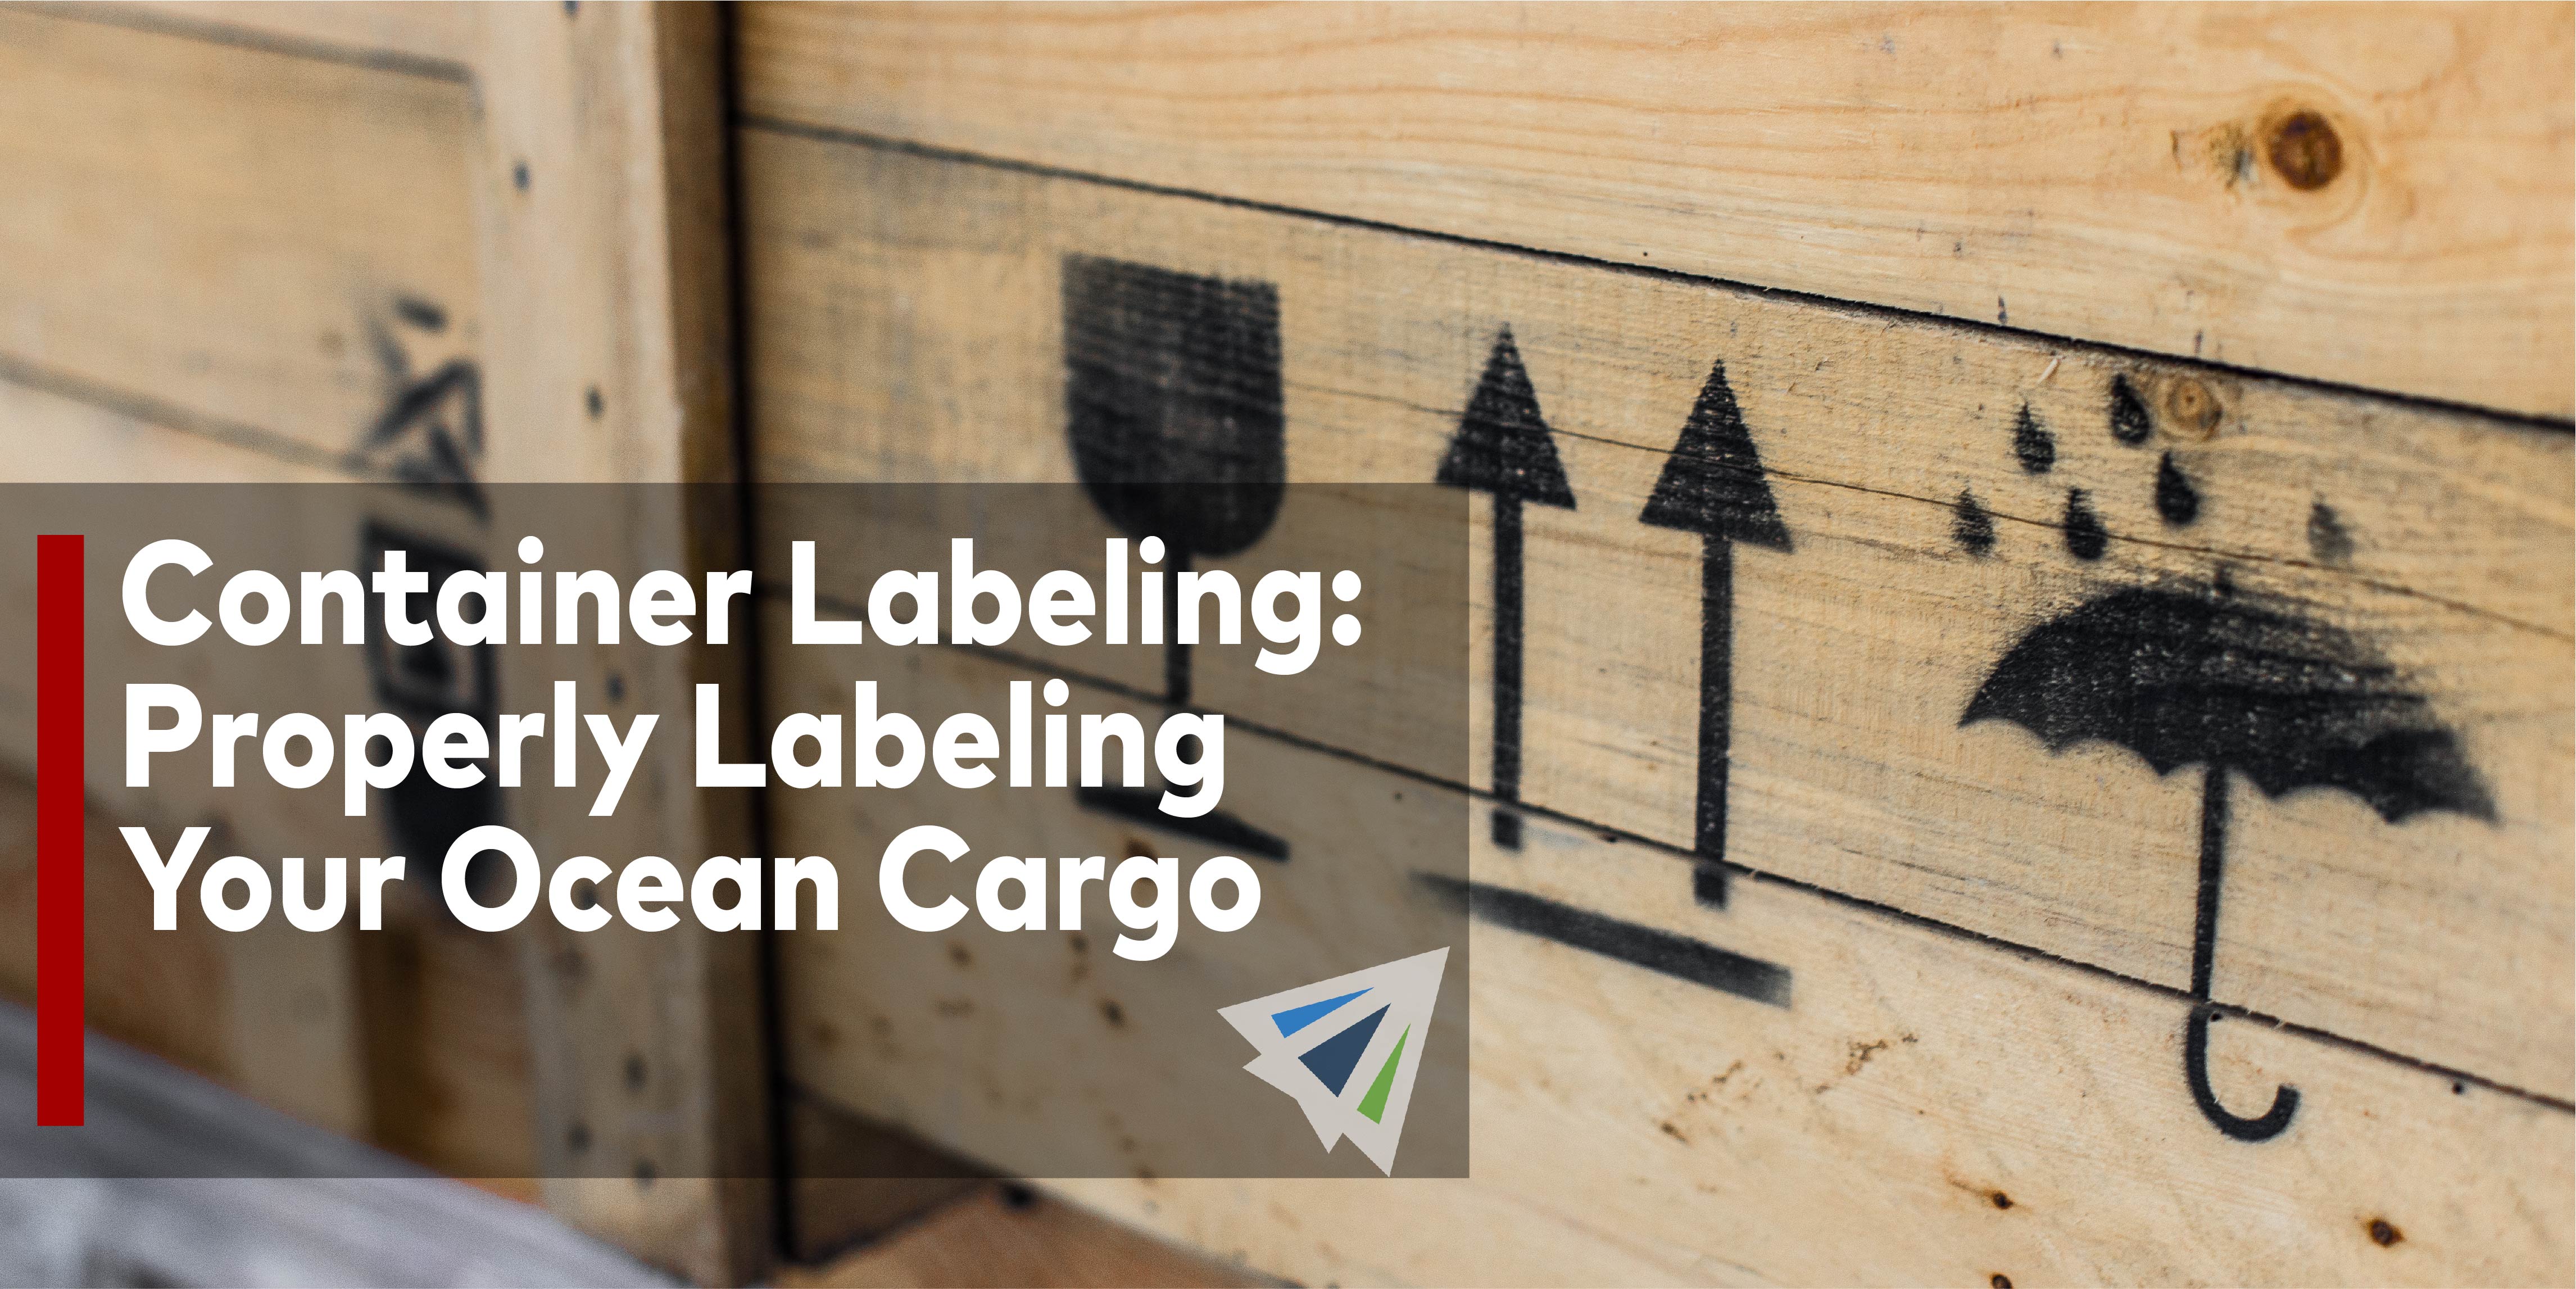 Container Labeling: Properly Labeling Your Ocean Cargo